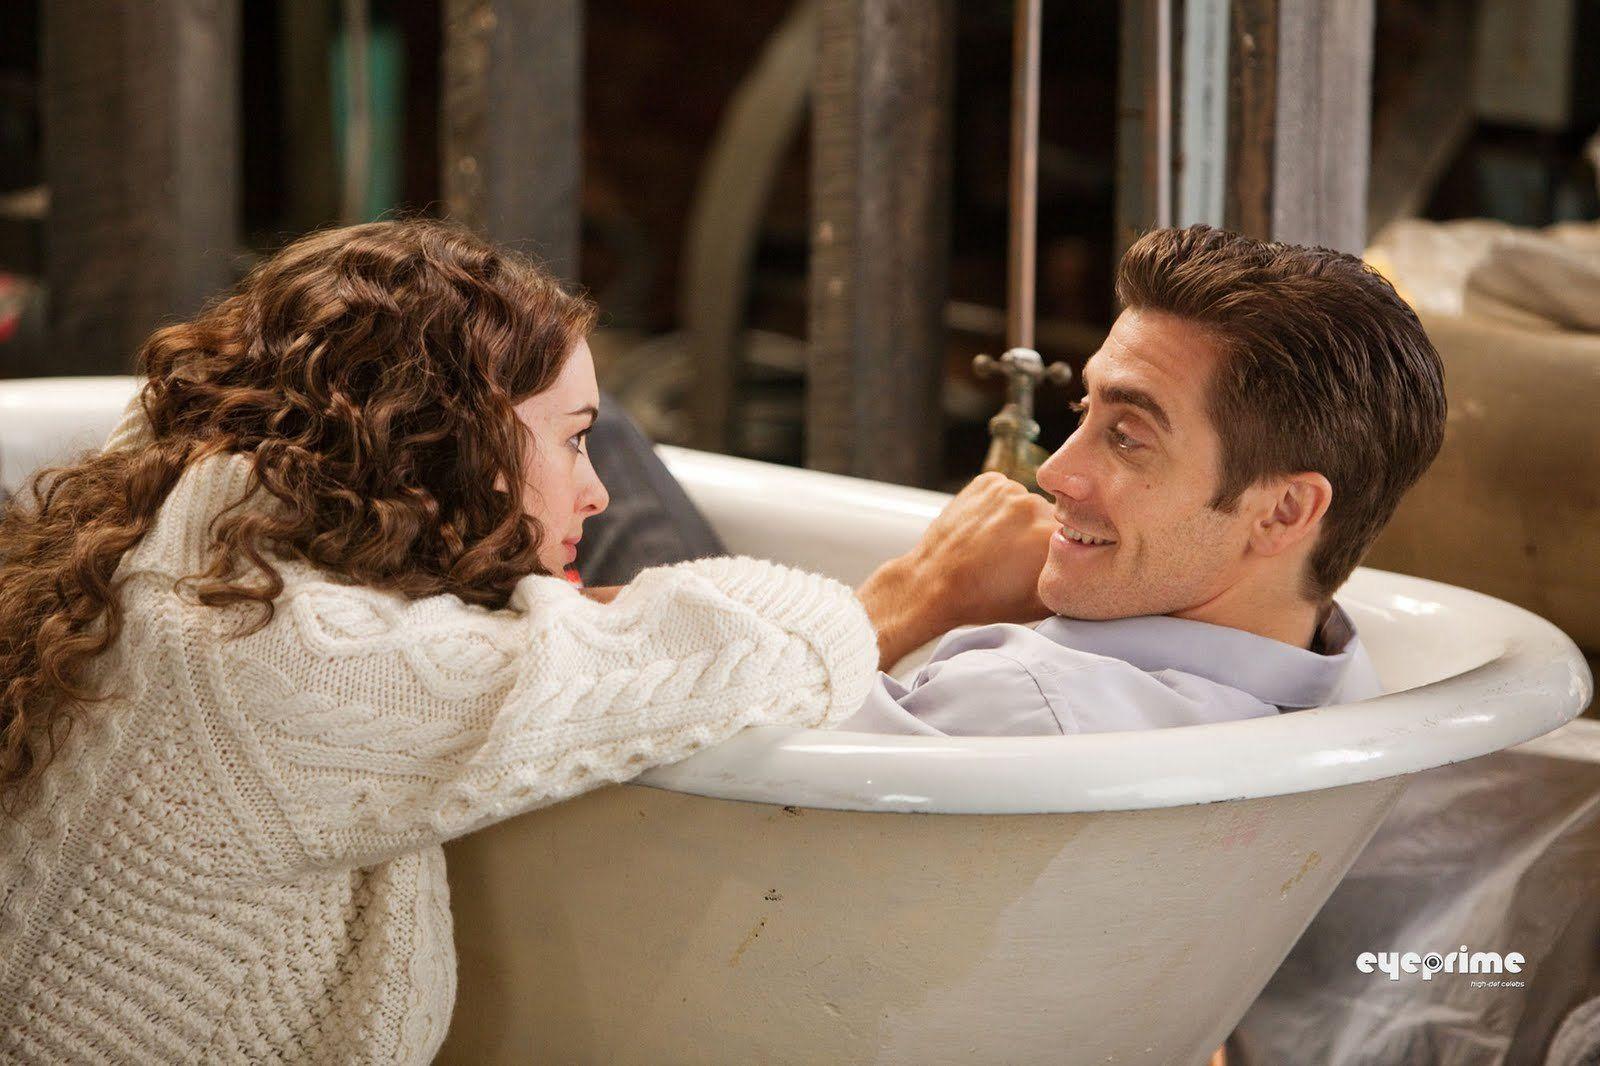 Love & Other Drugs Stills & Other Drugs Photo 23744679